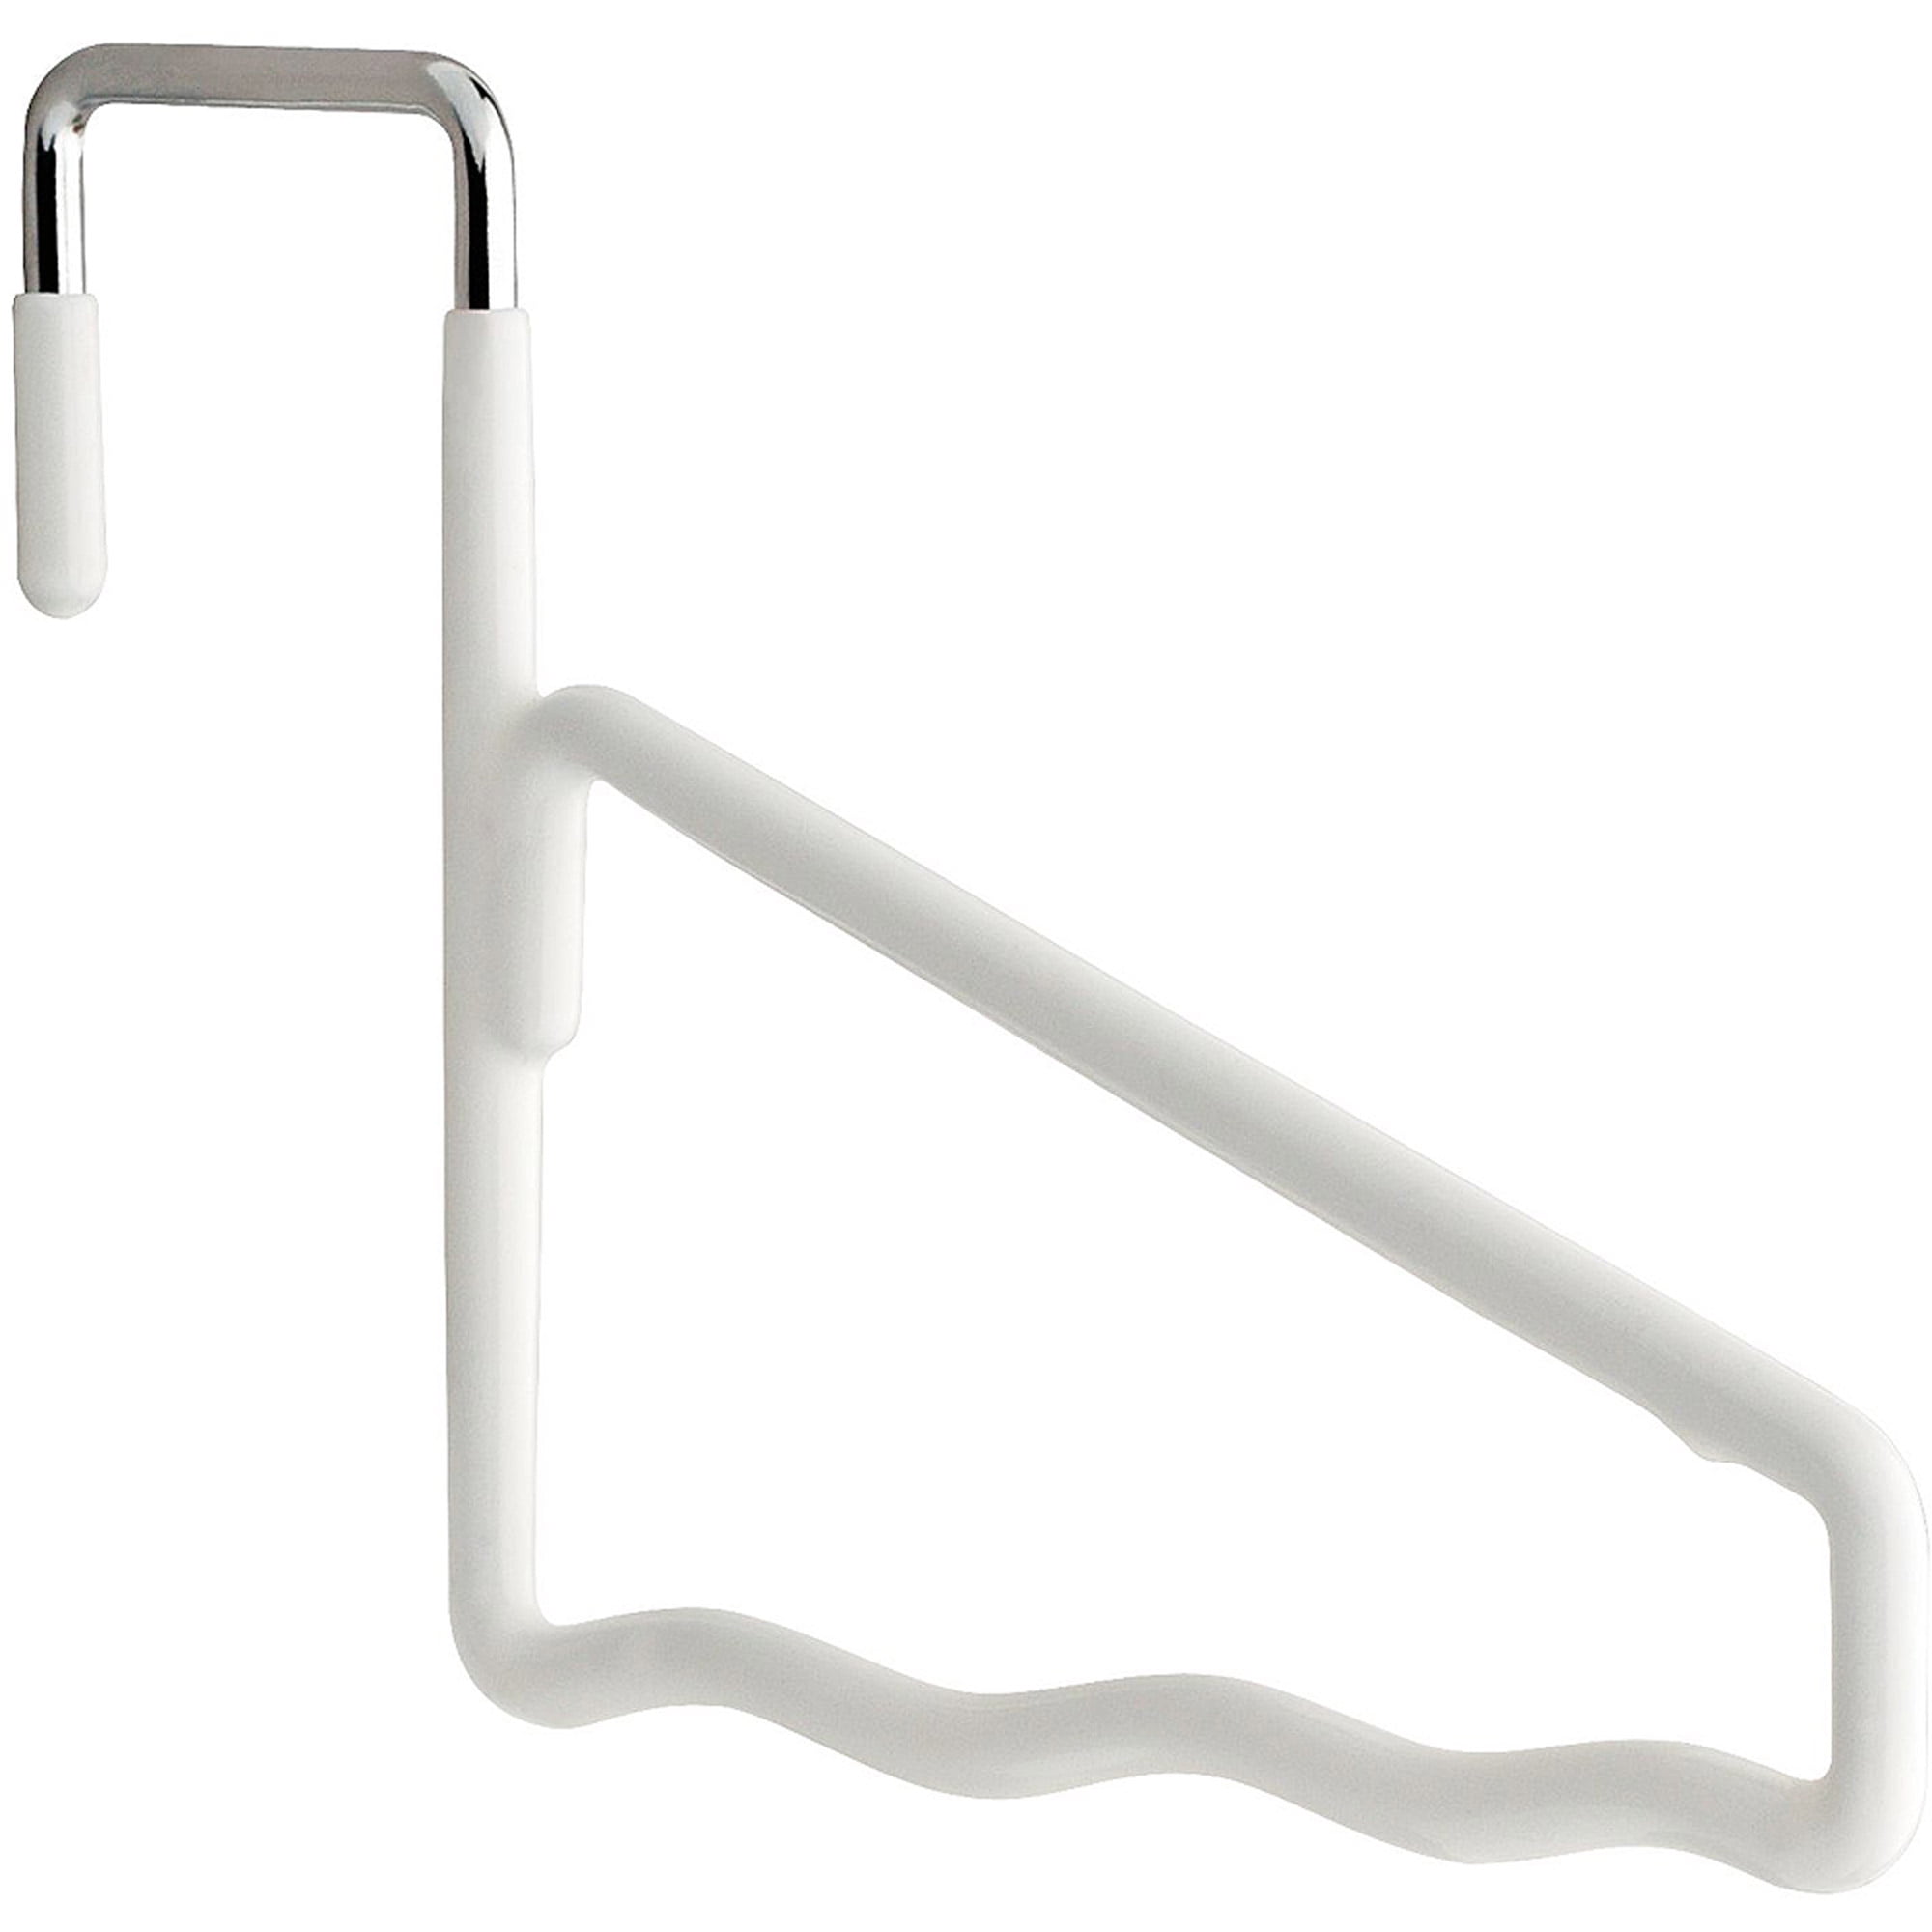 172230-Free Shipping! New Arrow Utility Hook with Anchors 4/pk 